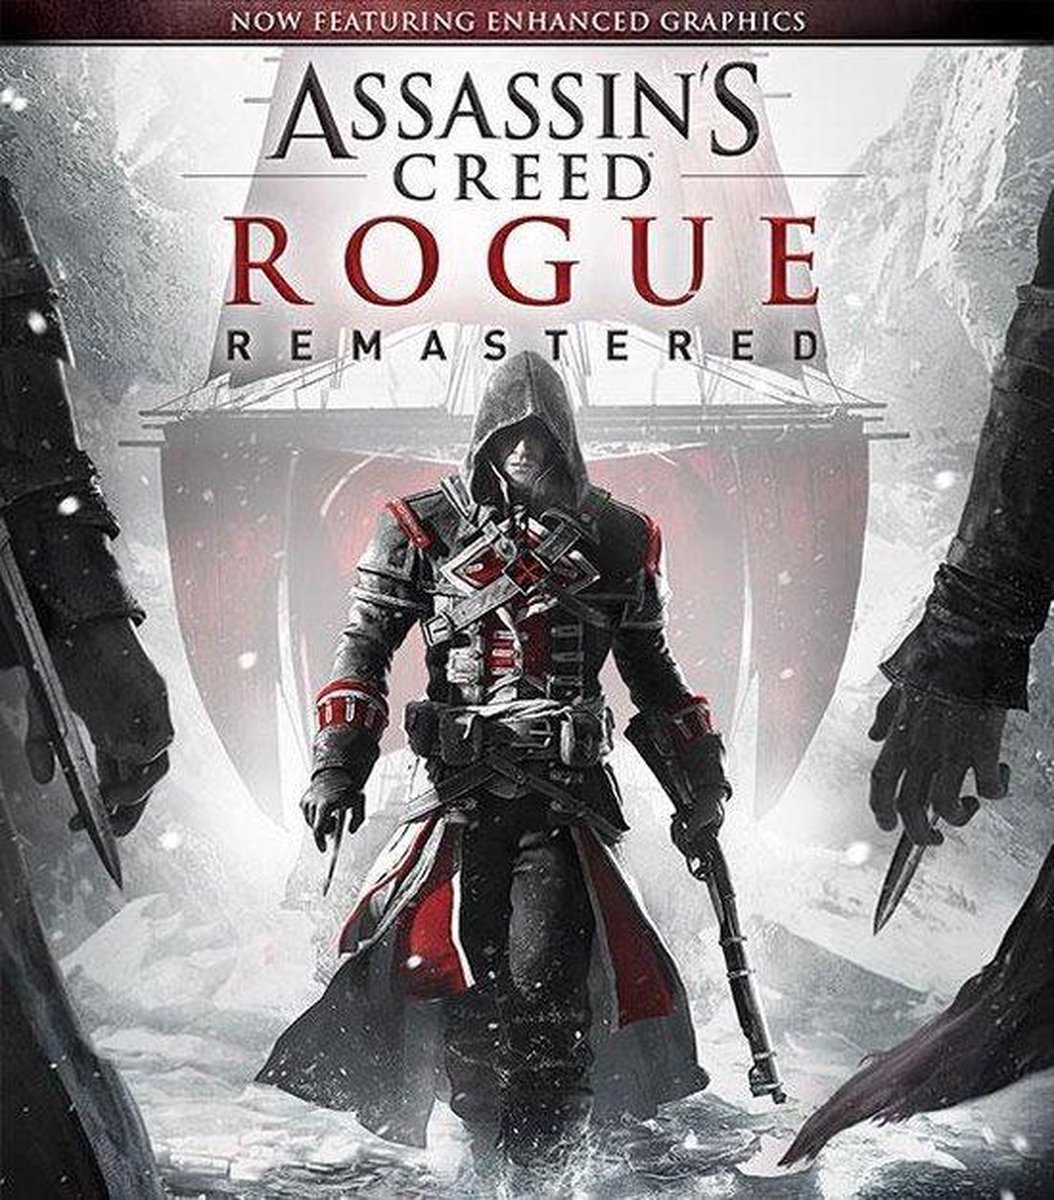 Assassin's Creed Unity Xbox ONE Pas Cher Neuf